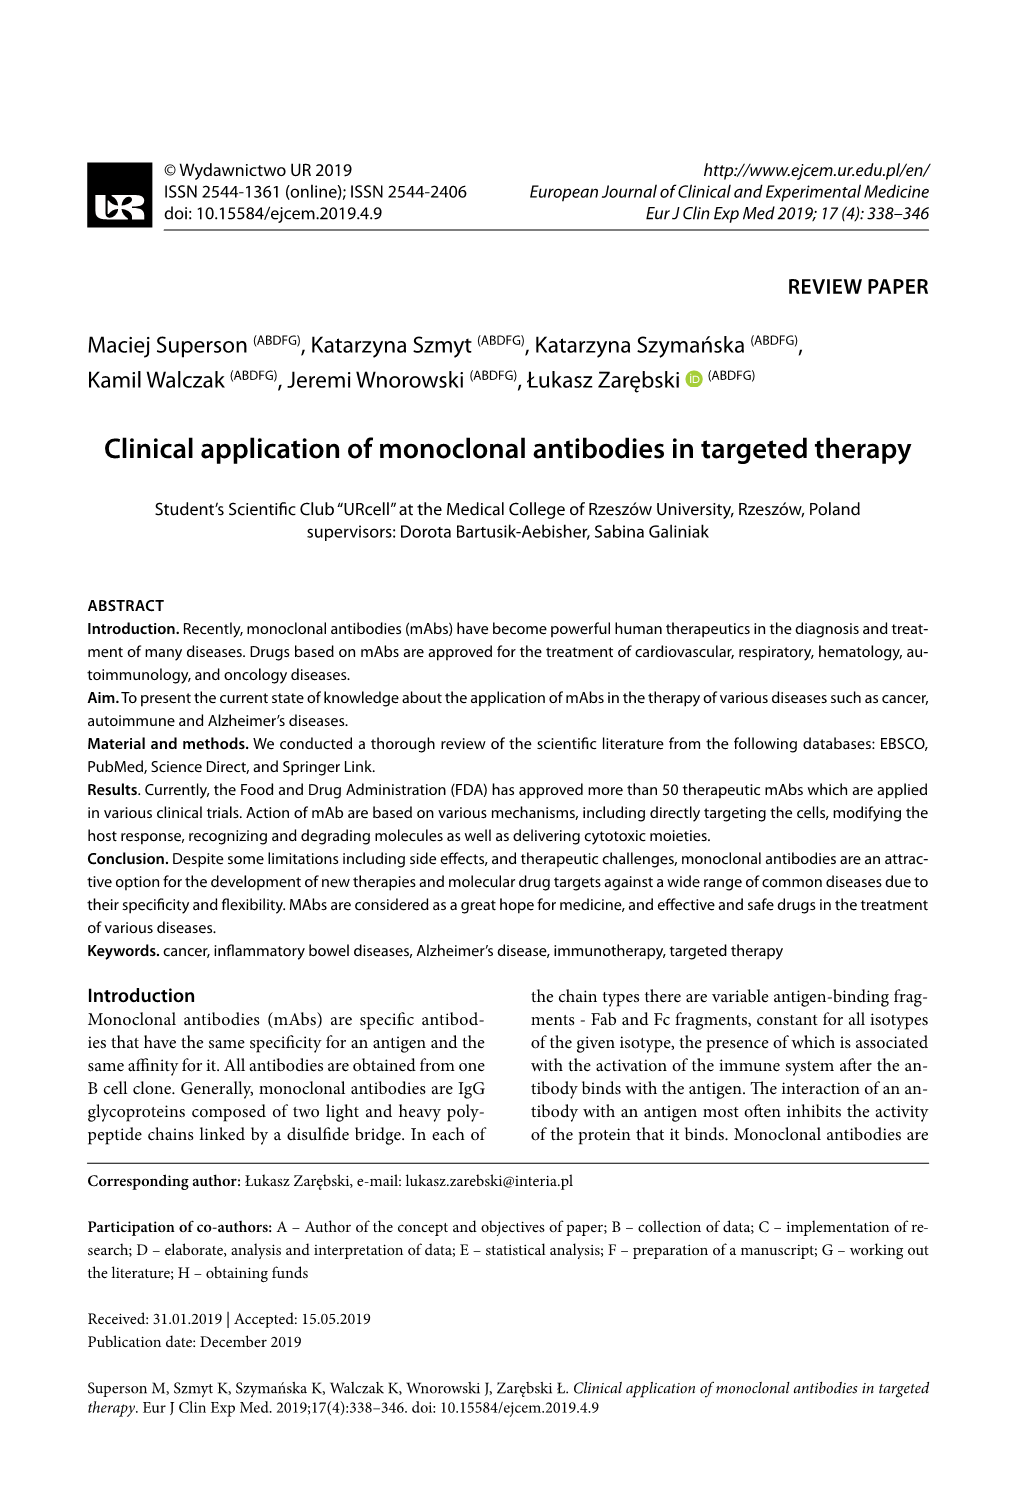 Clinical Application of Monoclonal Antibodies in Targeted Therapy